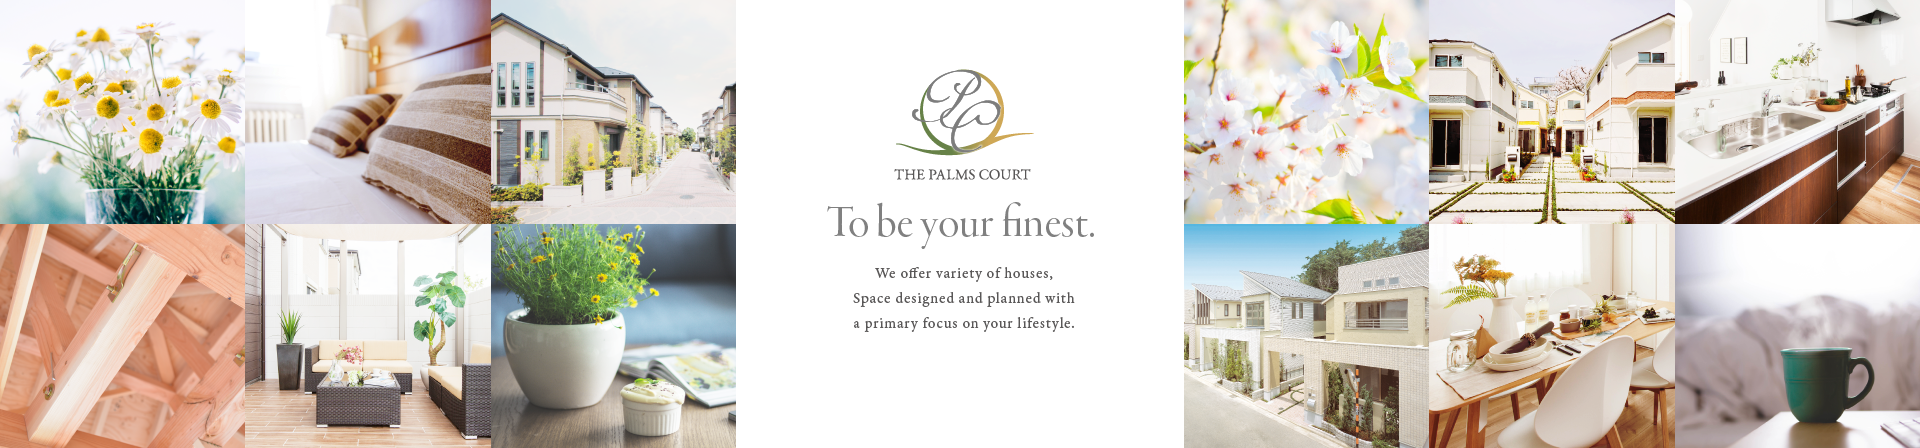 THE PALMS COURT　To be your finest